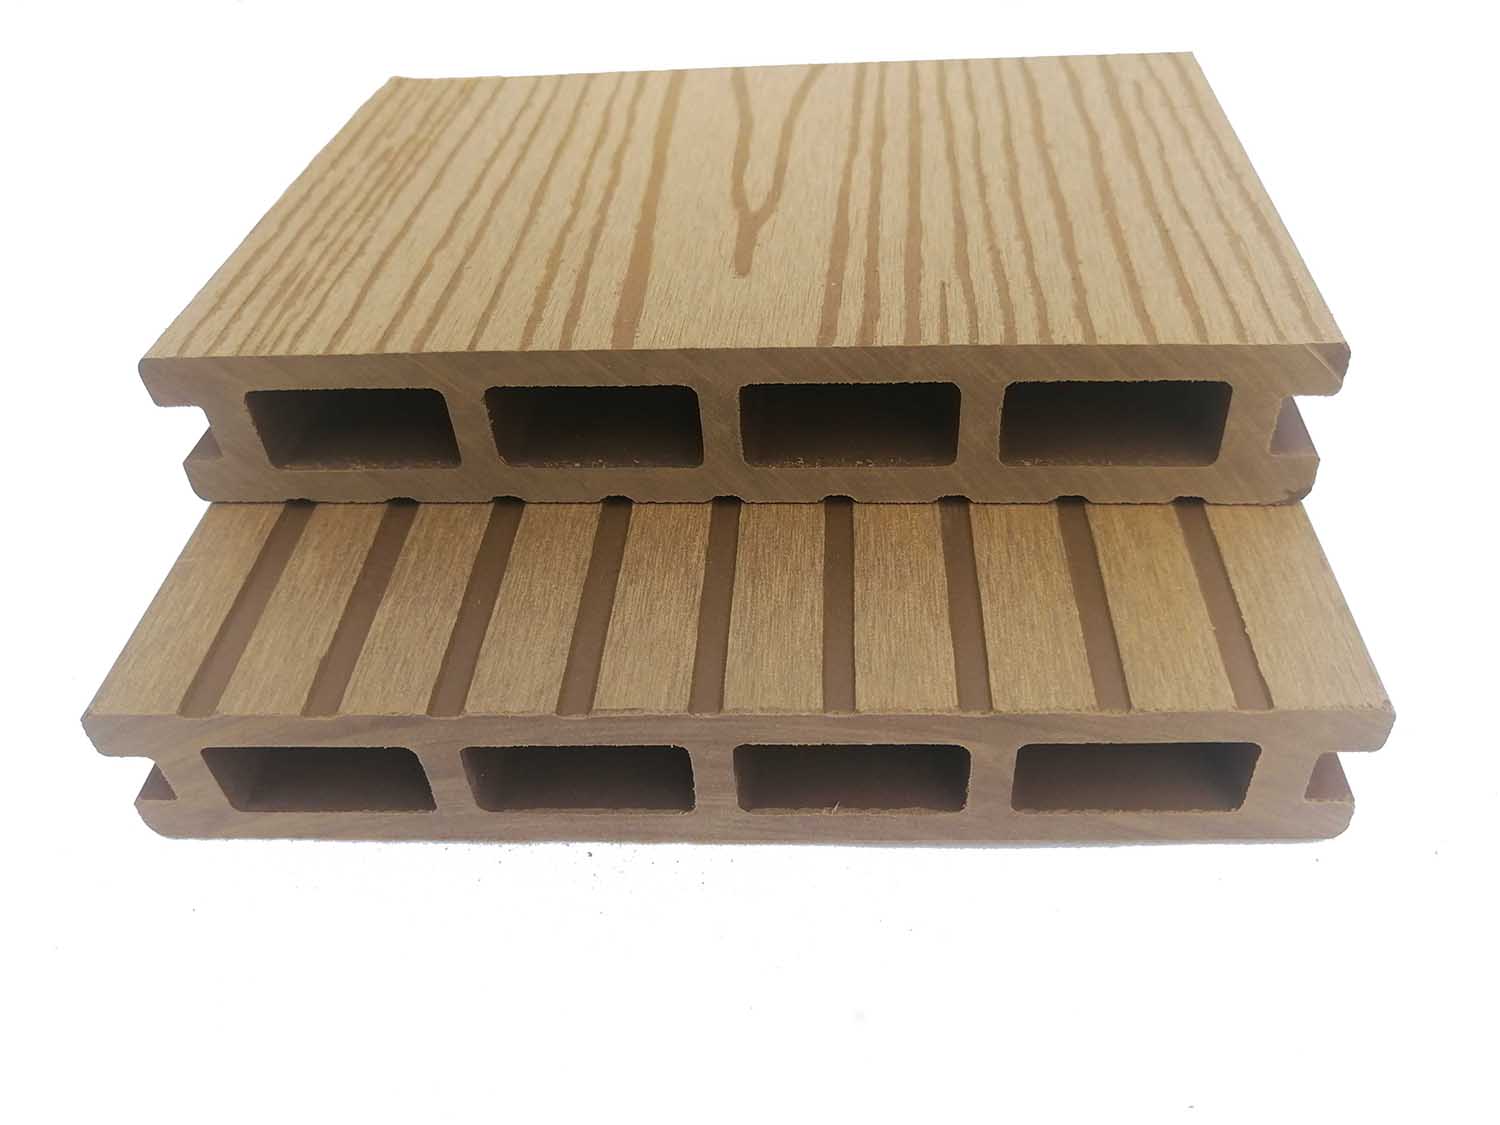 How to choose composite decking?